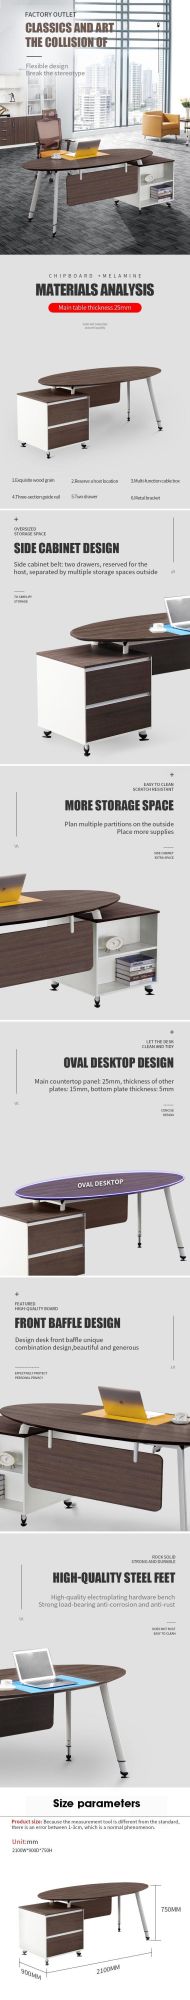 Straight I-Shaped Oval Small Staff Computer Table Metal Frame Leg Office Furniture Desk for Home